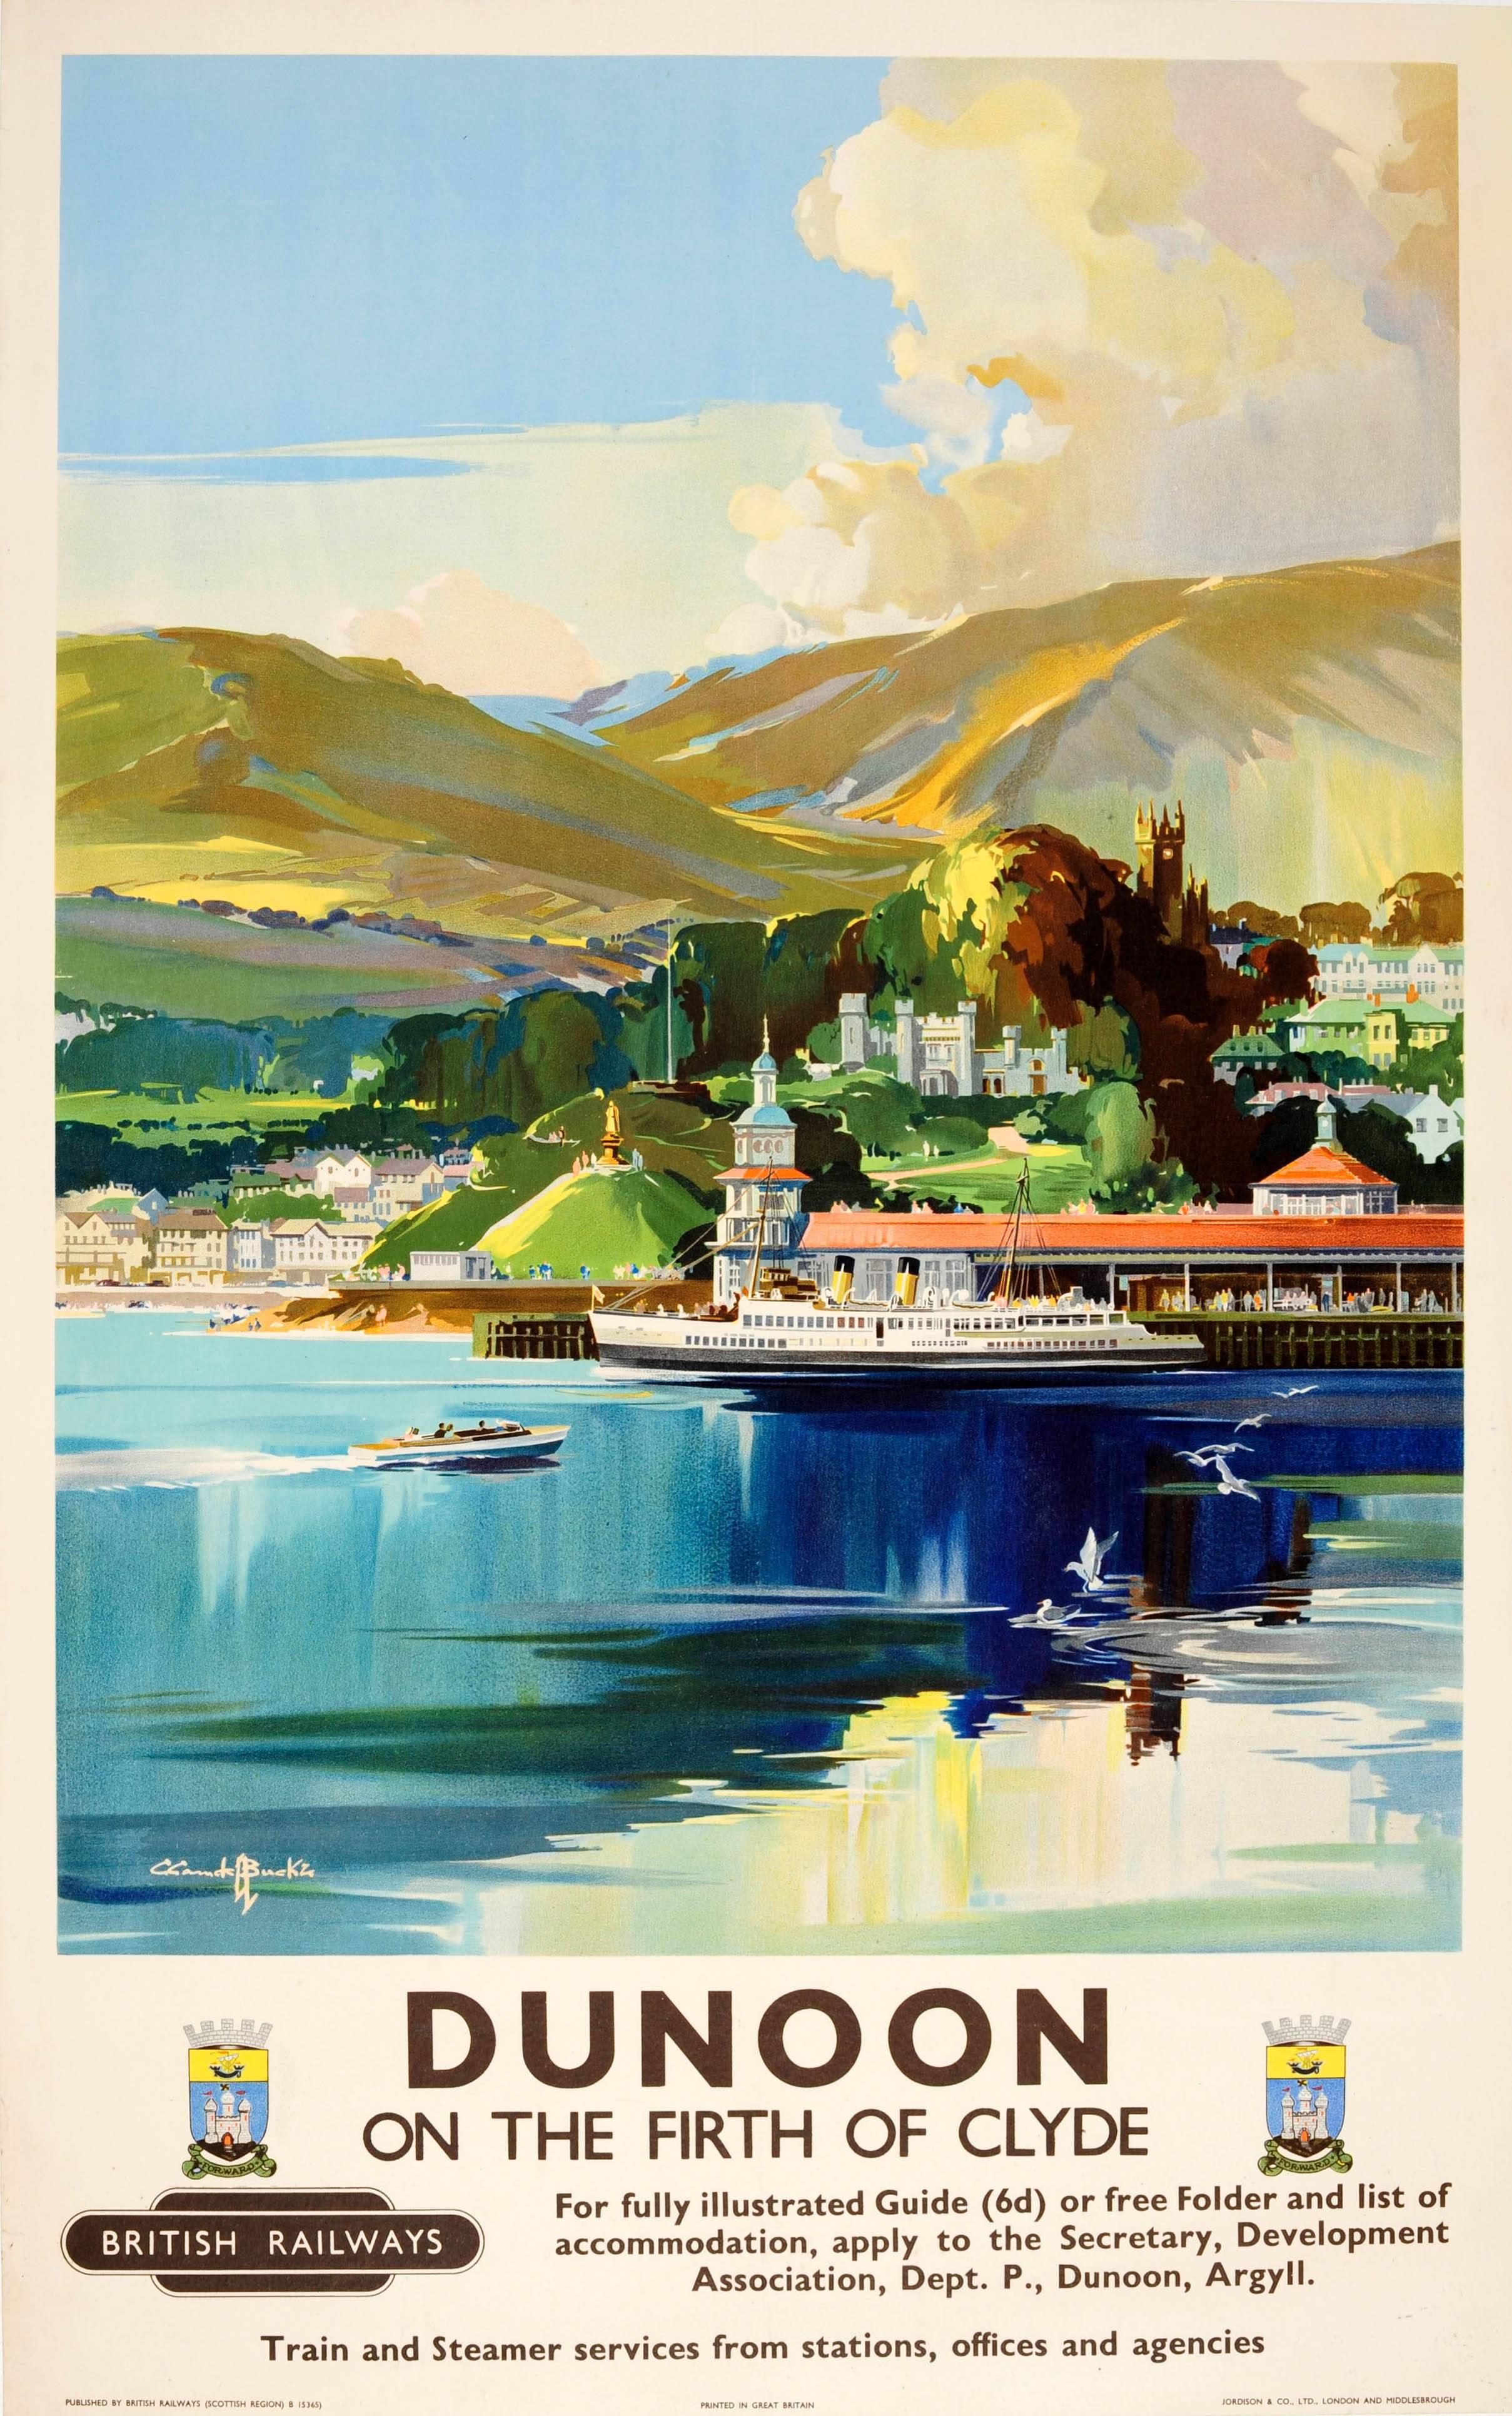 Claude Buckle Print - Original Vintage British Railways Poster - Dunoon On The Firth Of Clyde Scotland